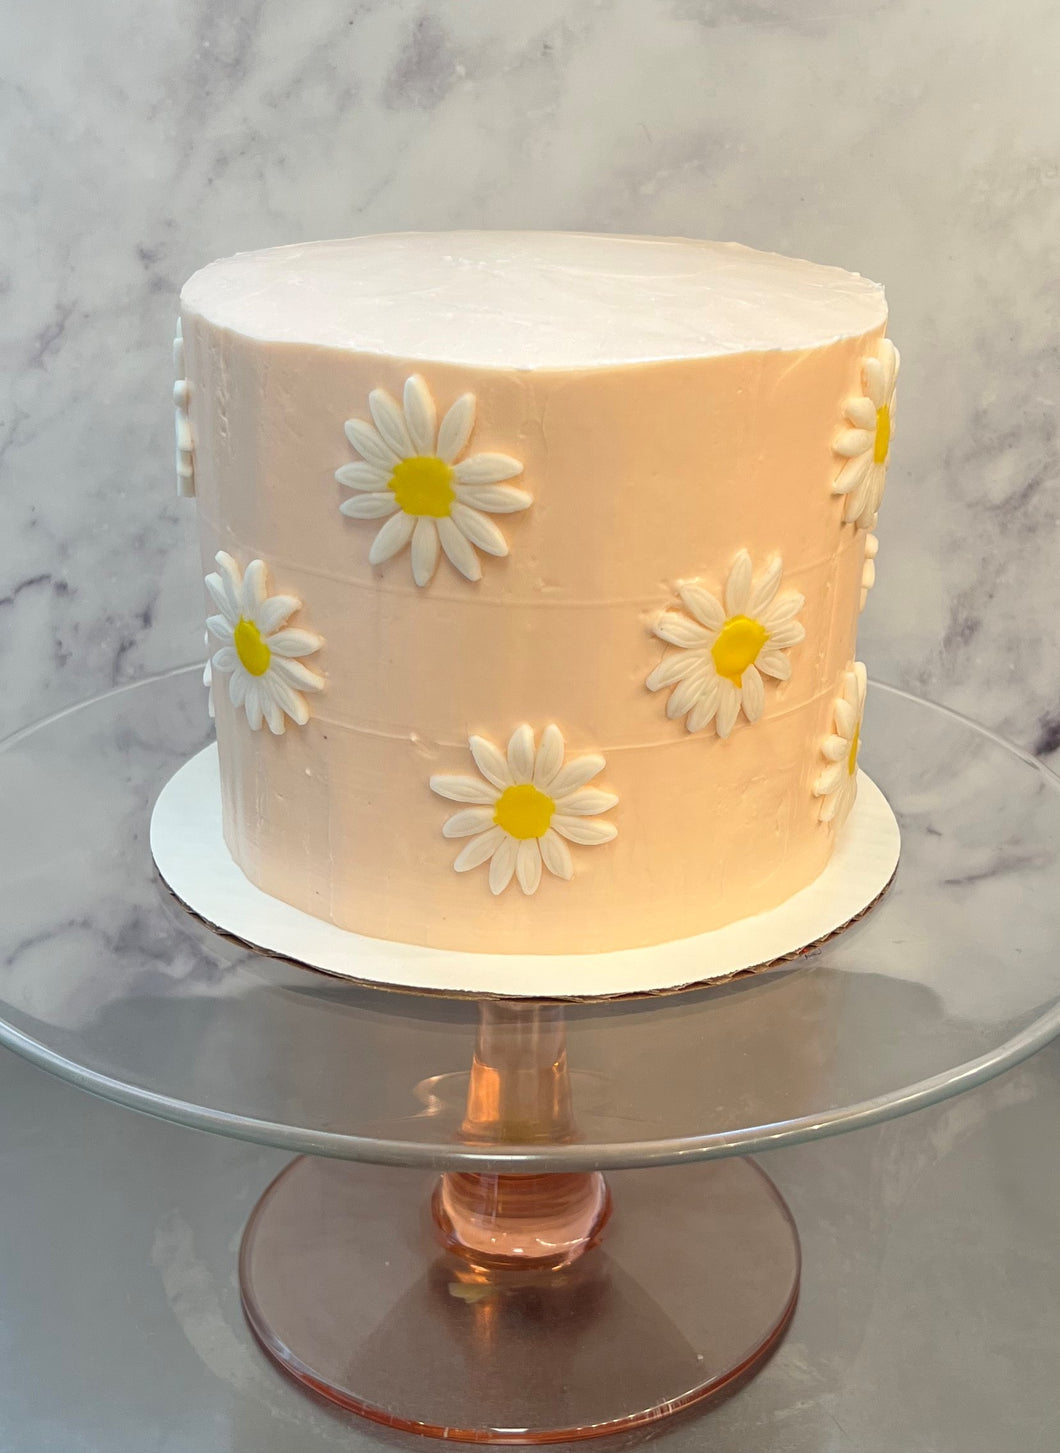 A custom 2-tier daisy cake for sweet baby girl Leah's 2nd birthday party  🥳🎂 Thank you Mommy @cherylisaunicorn for sharing with us the… | Instagram